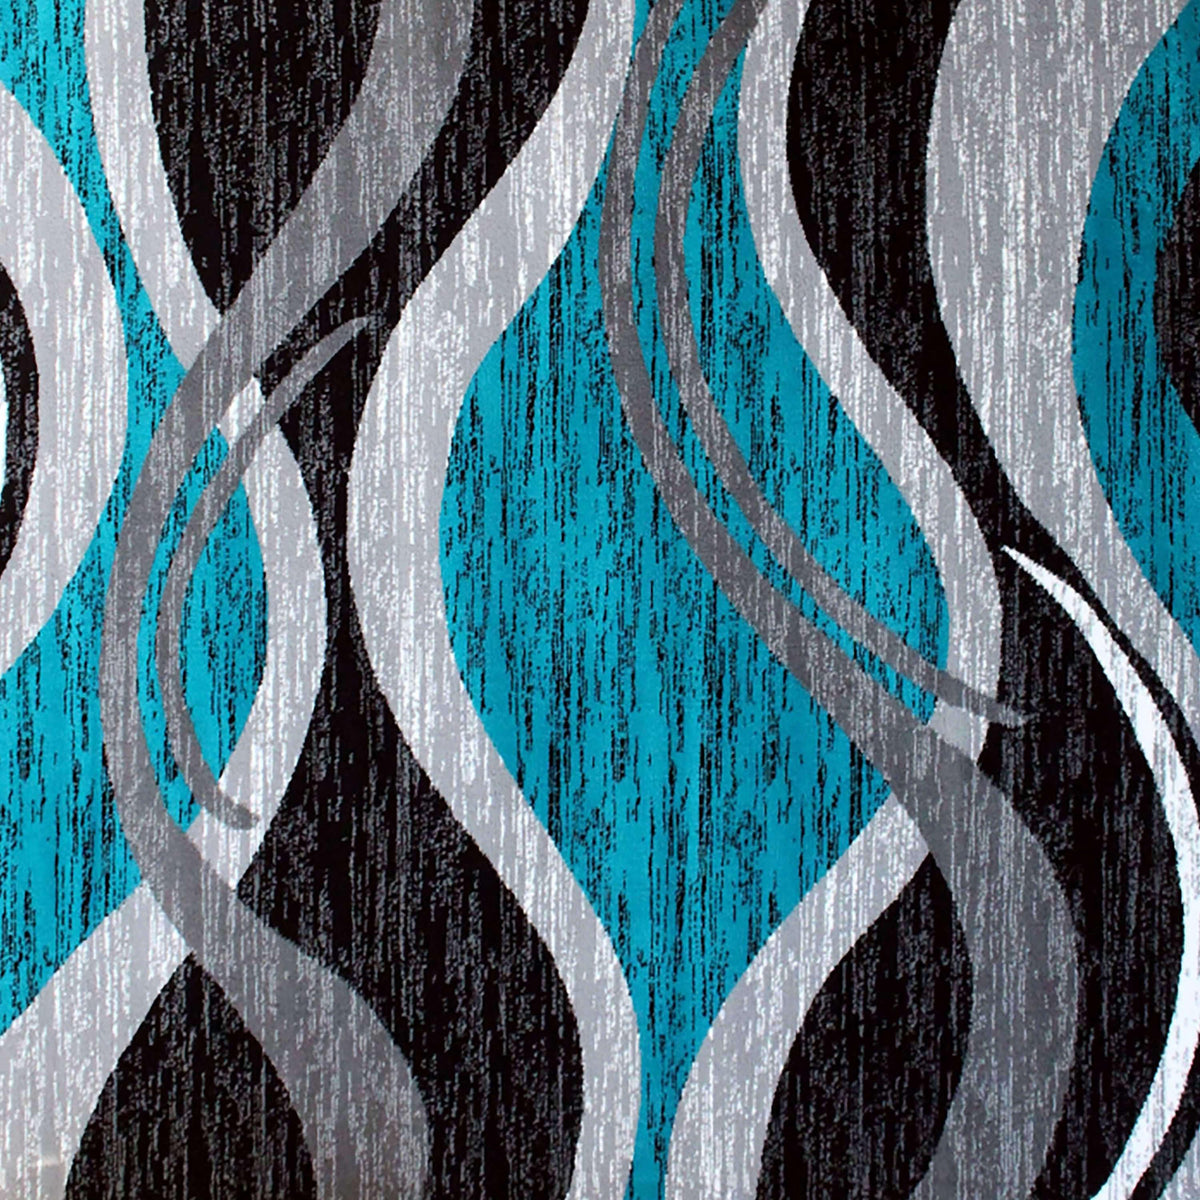 Turquoise,2' x 7' |#| Modern Ripple Abstract Area Rug - Turquoise, Black, White, & Gray - 2' x 7'